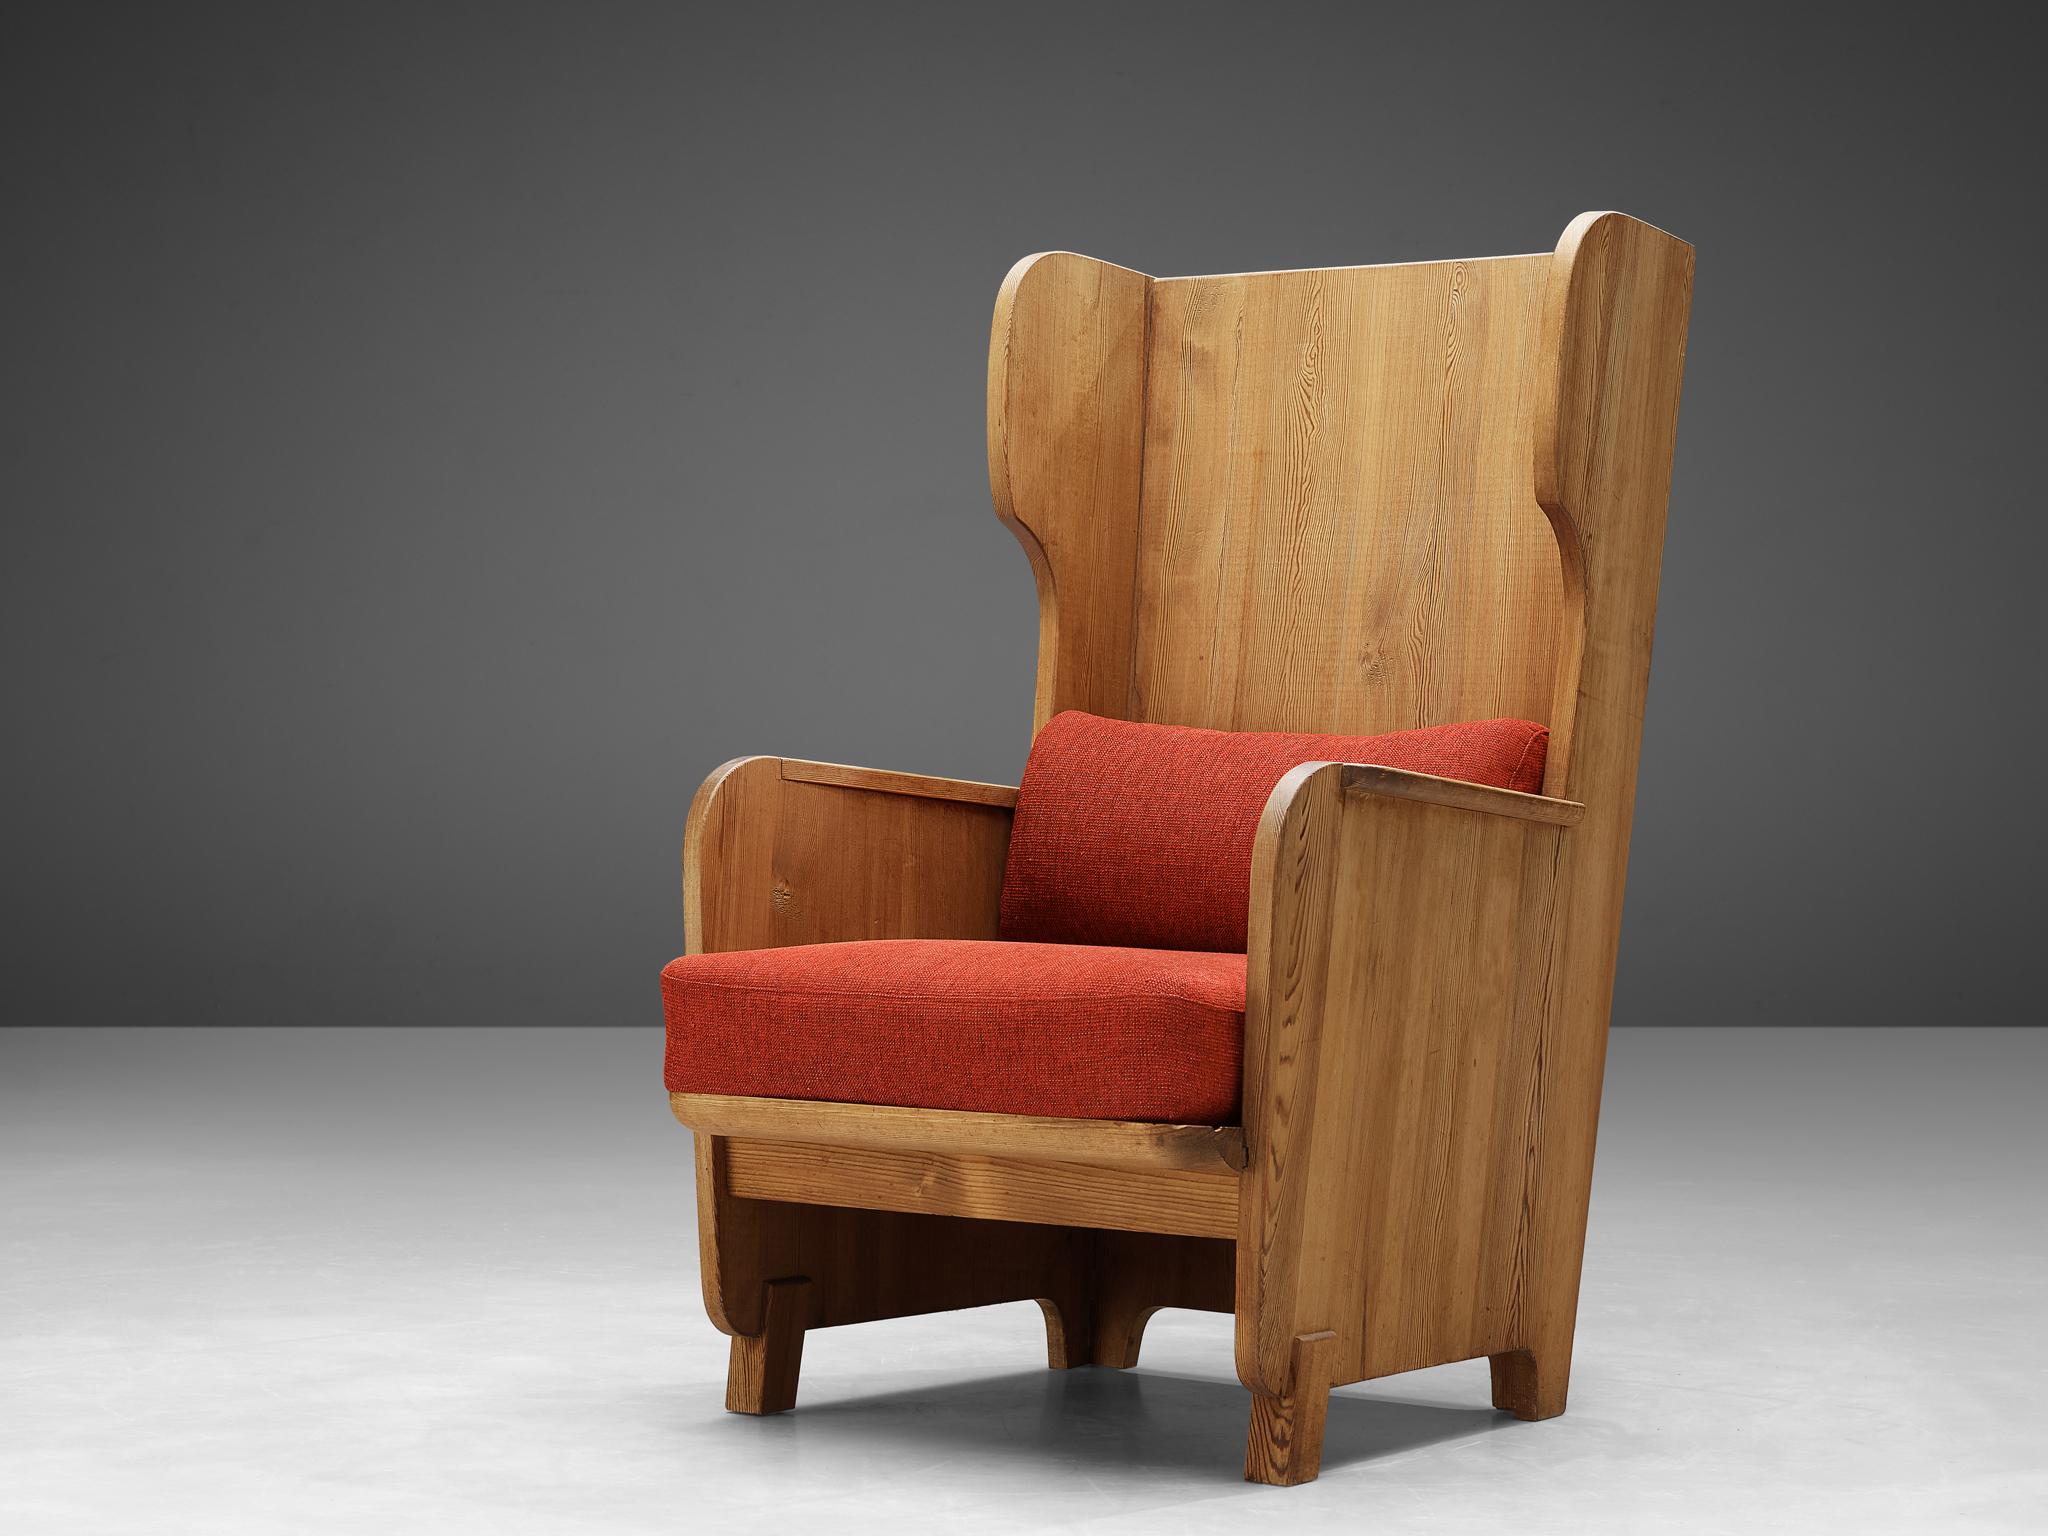 Axel Einar Hjorth, wingback lounge chair model 'Lovö', pine, red fabric, Sweden, 1932

Sturdy high back ‘Lovö’ chair in solid pine by Axel Einar Hjorth. This chair has all classical elements of a wingback chair, yet due the execution in natural